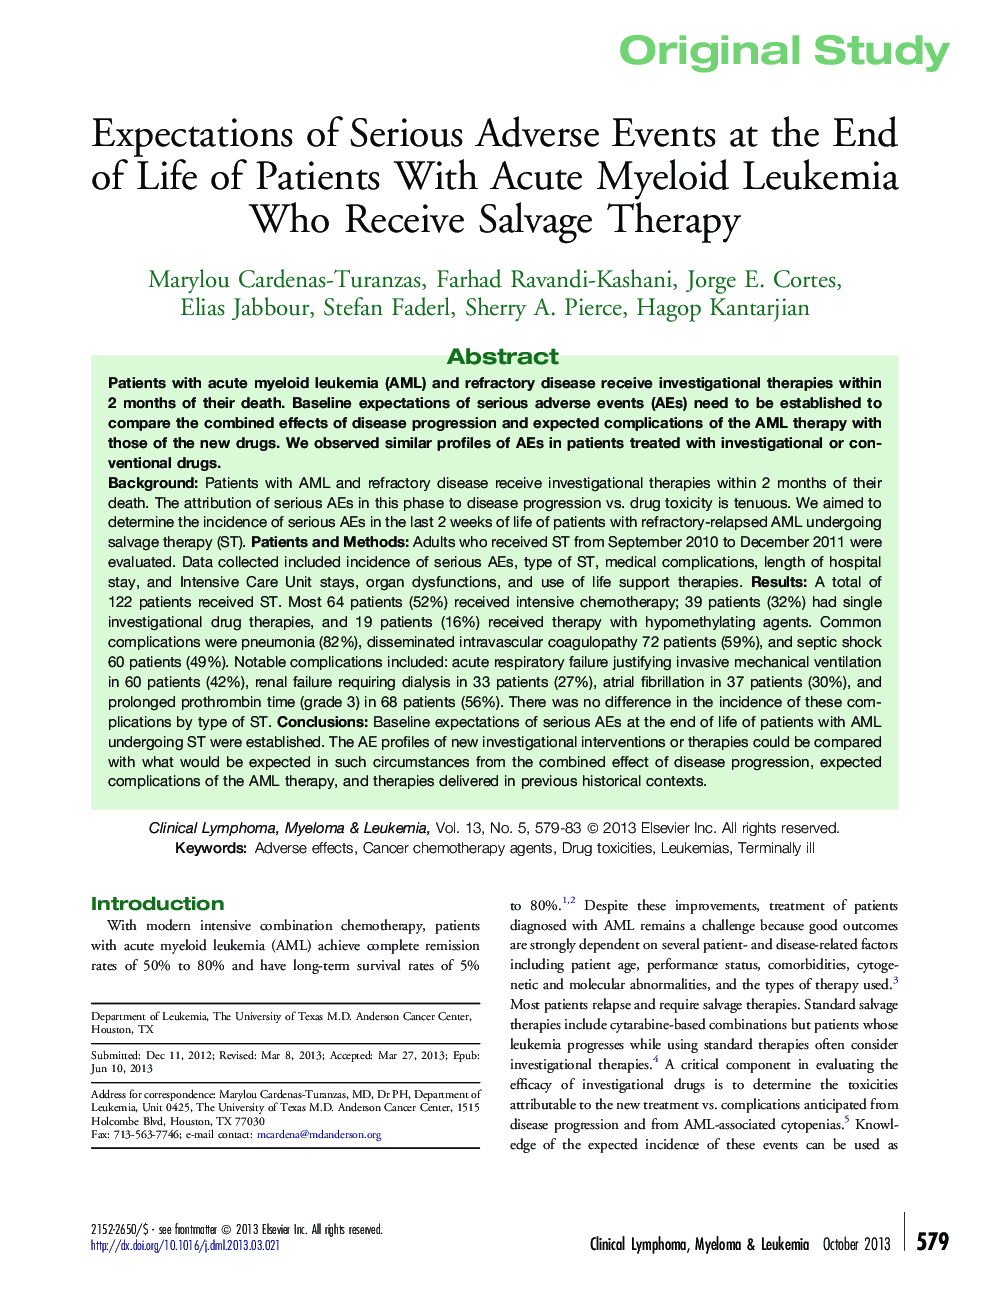 Expectations of Serious Adverse Events at the End of Life of Patients With Acute Myeloid Leukemia Who Receive Salvage Therapy